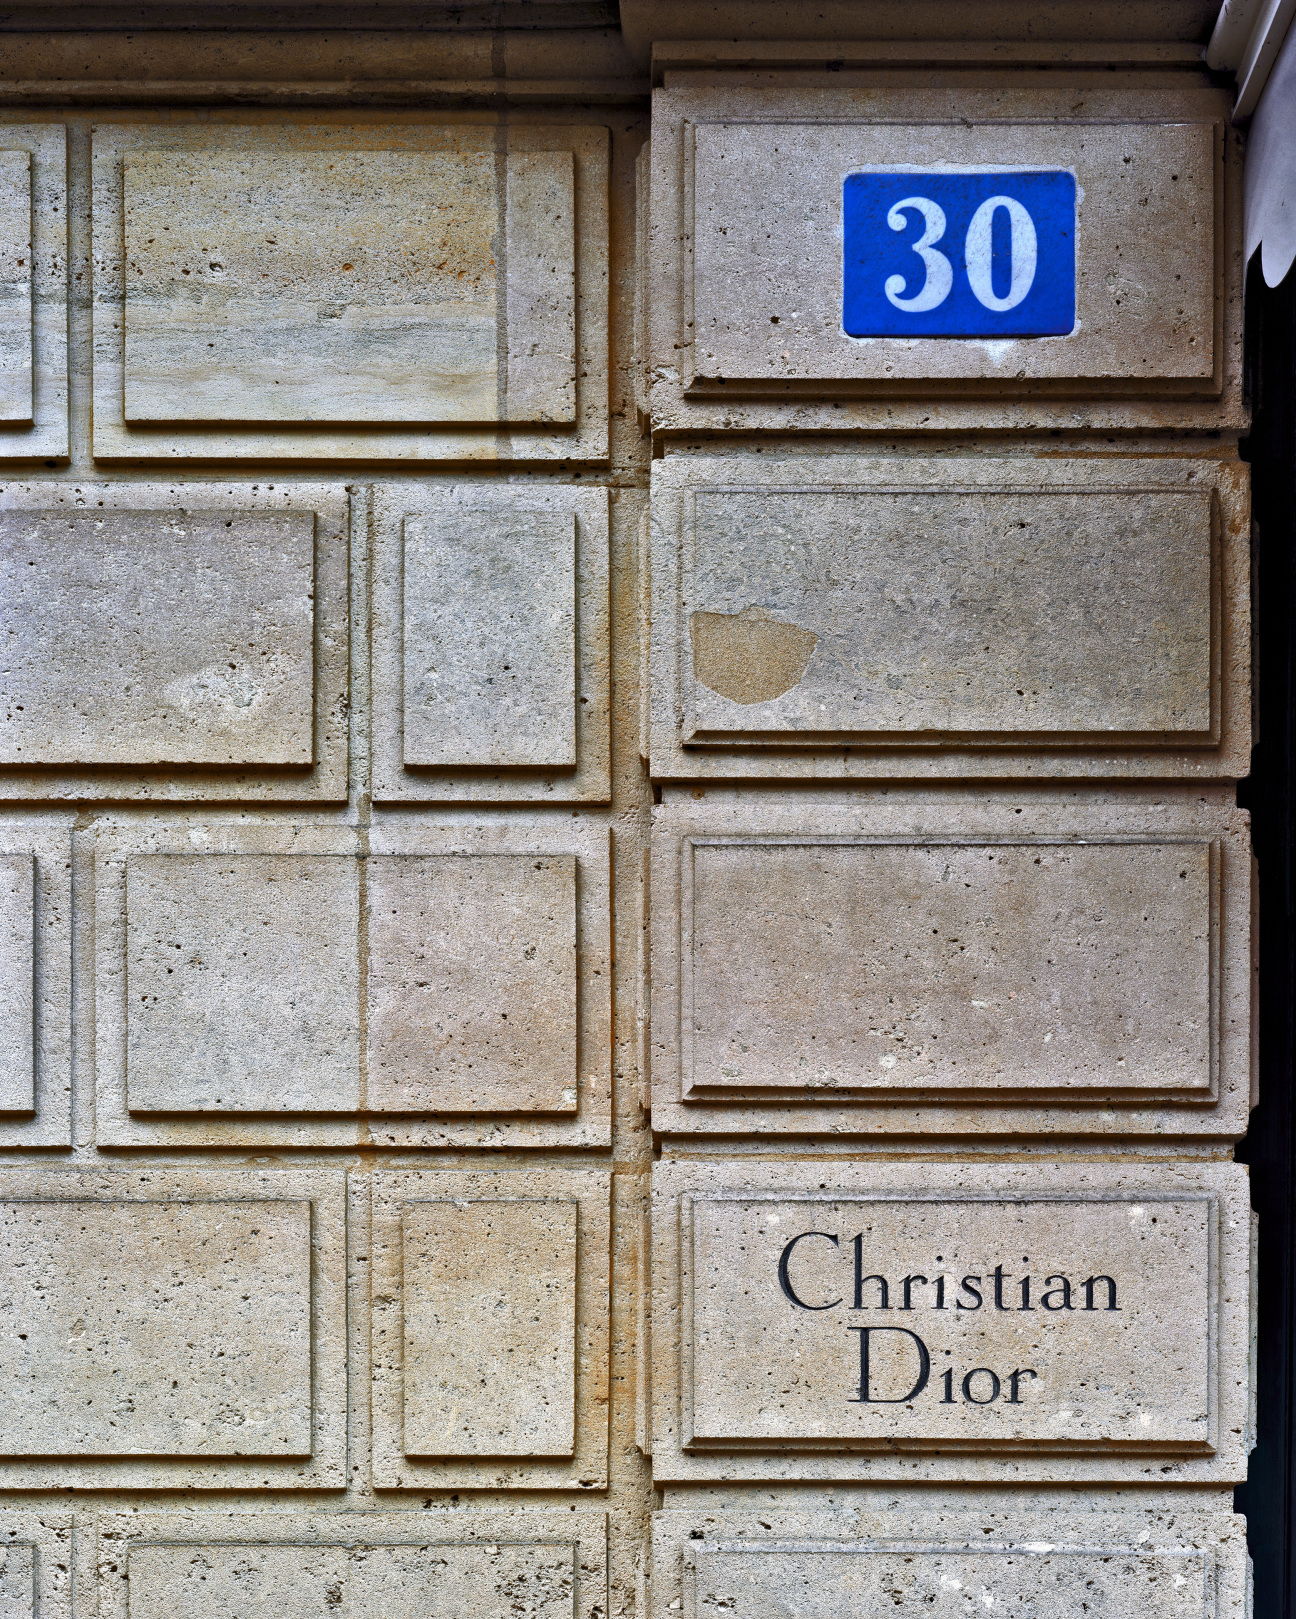 Christian Dior Building Maison in Avenue Montaigne 30 in Paris France  Editorial Stock Image  Image of expensive avenue 142520624